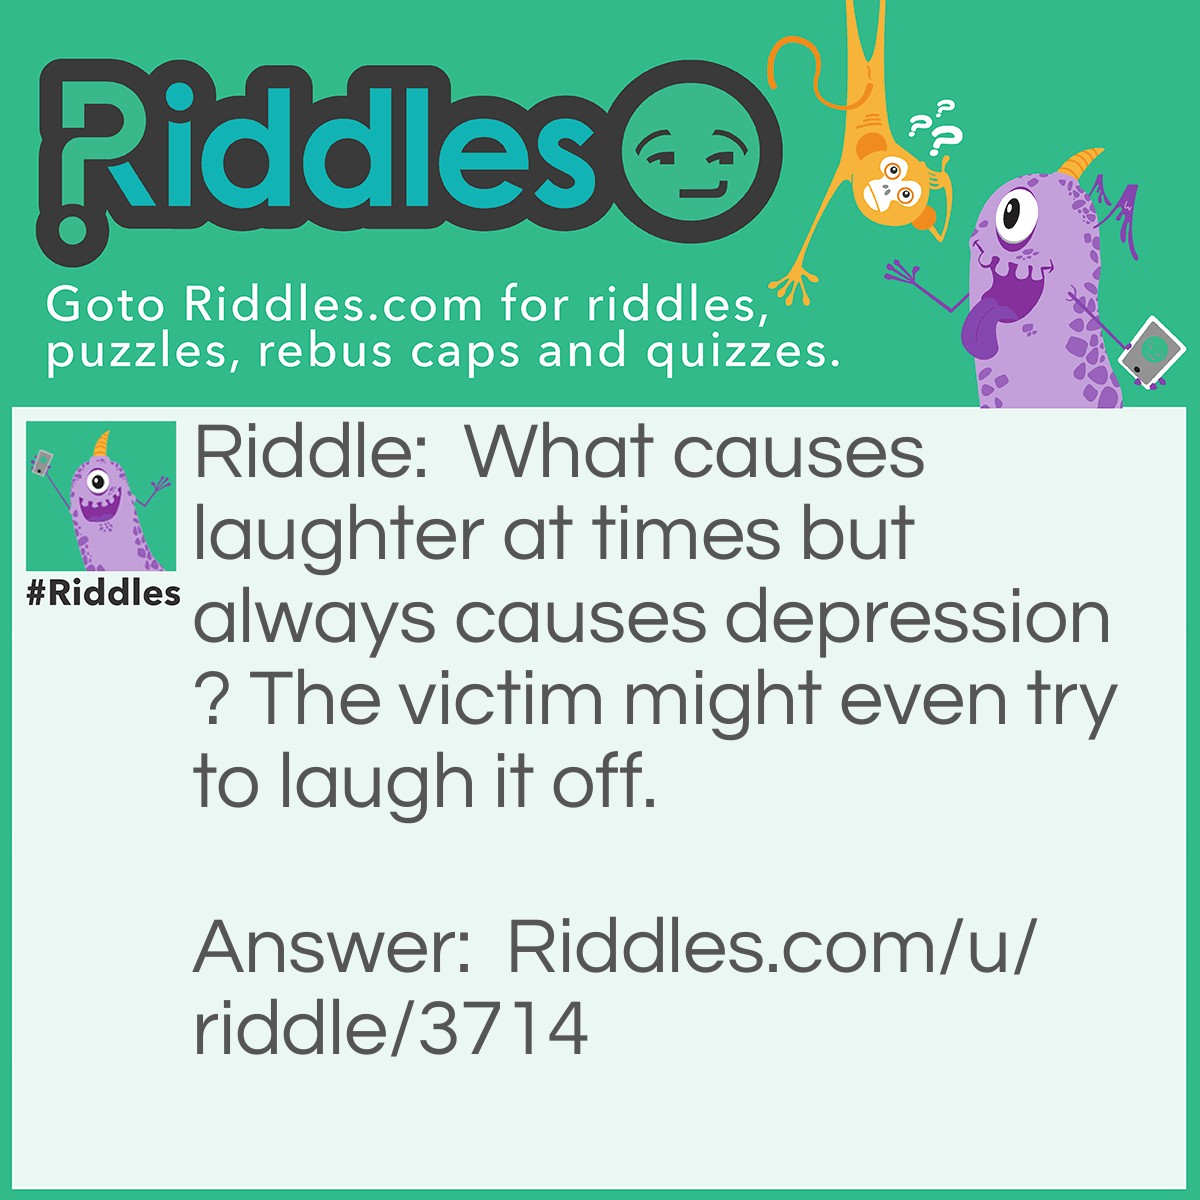 Riddle: What causes laughter at times but always causes depression? The victim might even try to laugh it off. Answer: An insult.